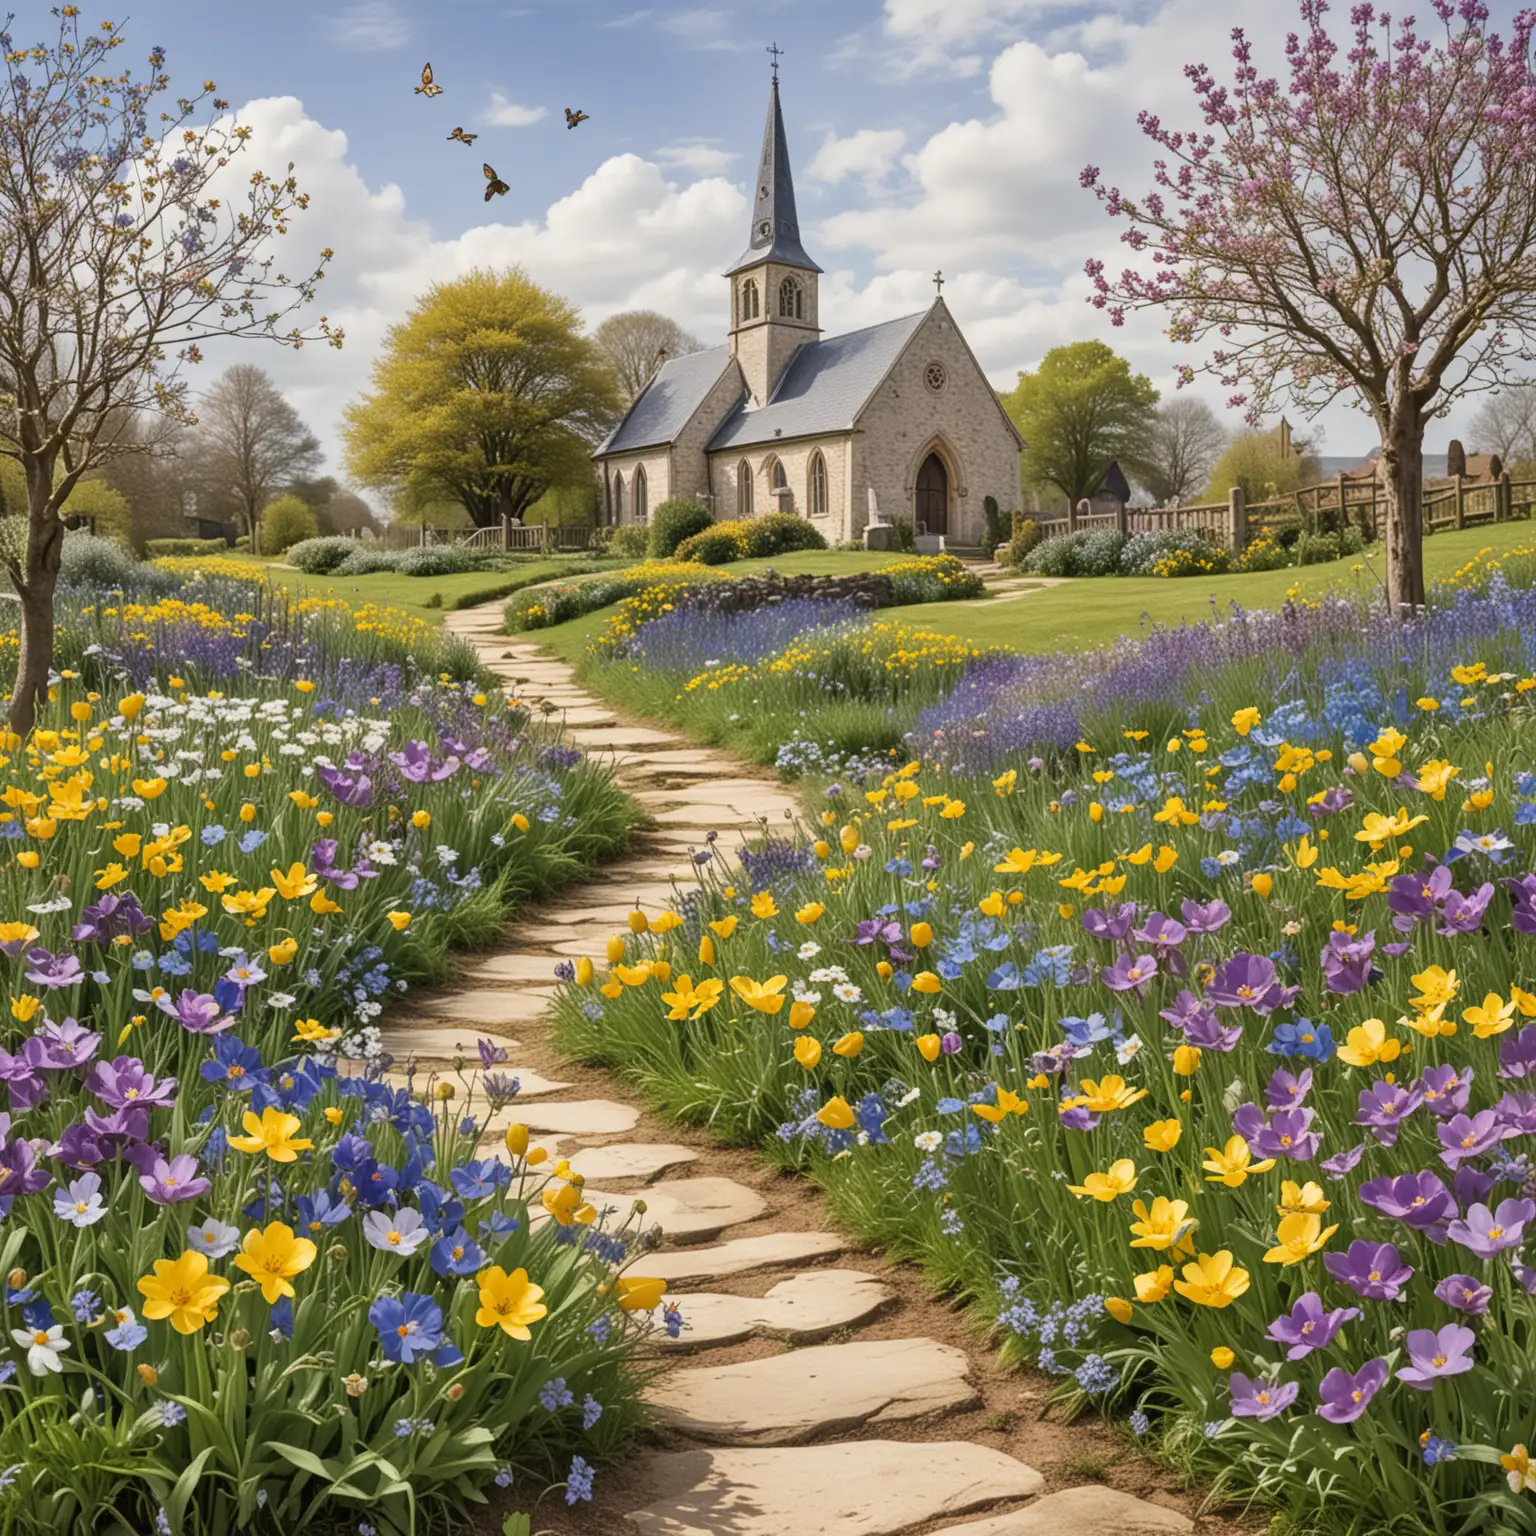 Easter Card horizontal shape showing a garden with wild easter flowers - purple, blue and yellow with buttercups. In the background have a small church design and a path with flowers leading to the church.